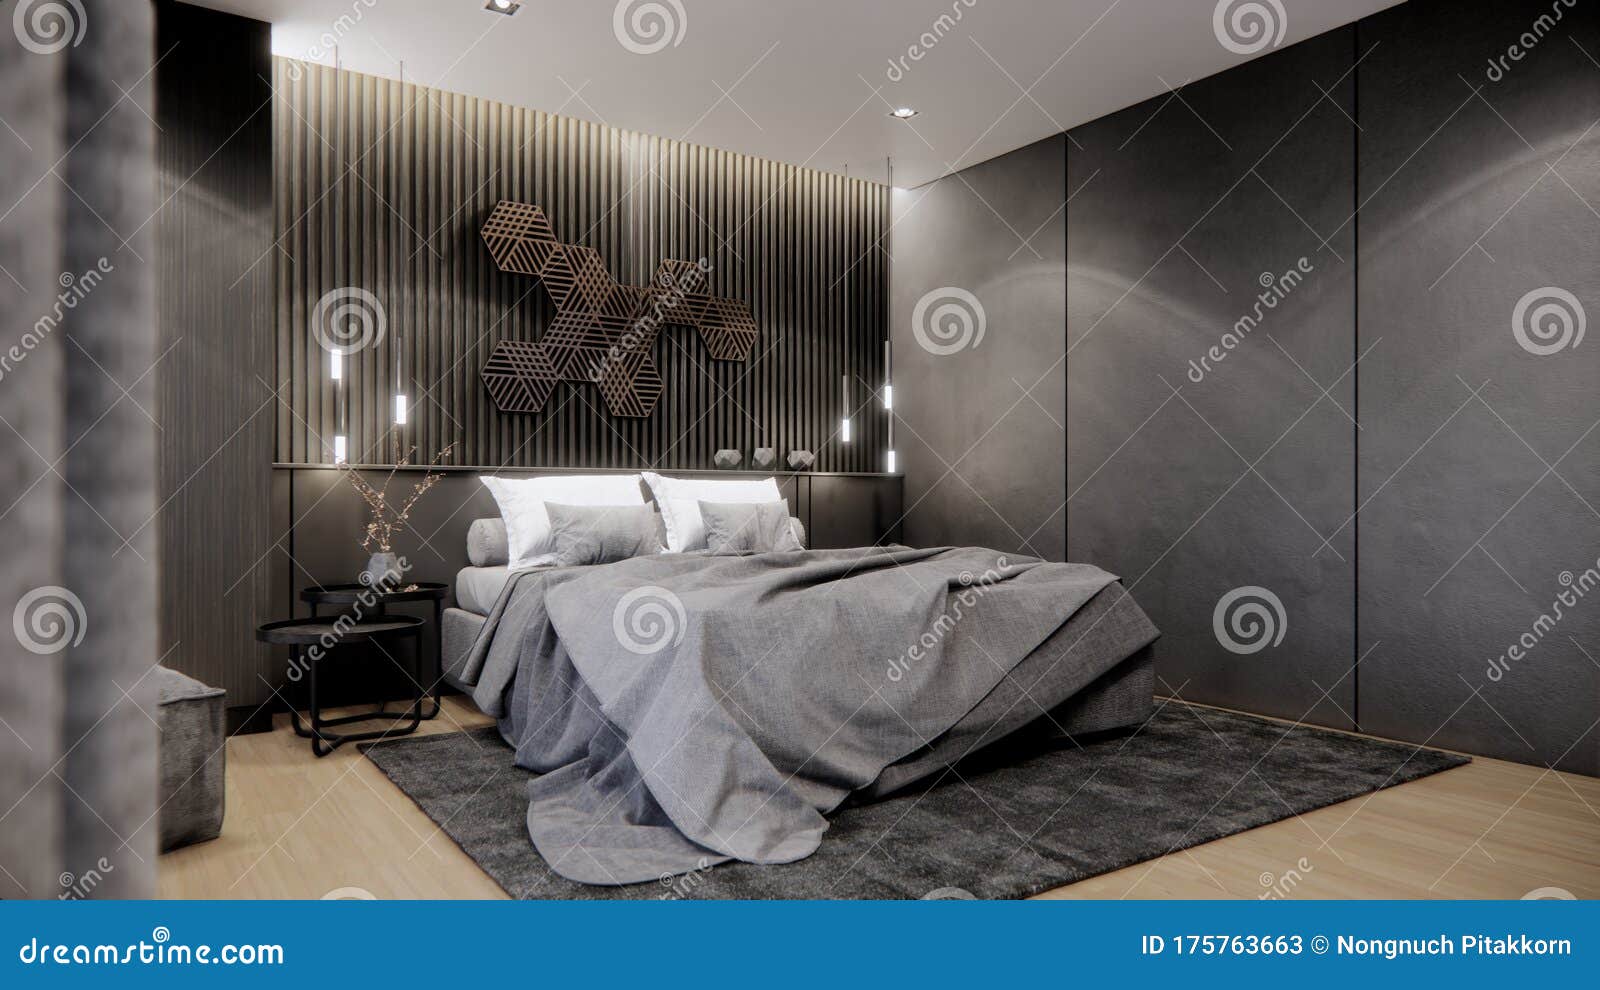 Interior Design of Modern Bedroom with Double Bed and Wood Wall, 3D Render  Background Stock Illustration - Illustration of creative, illusion:  175763663